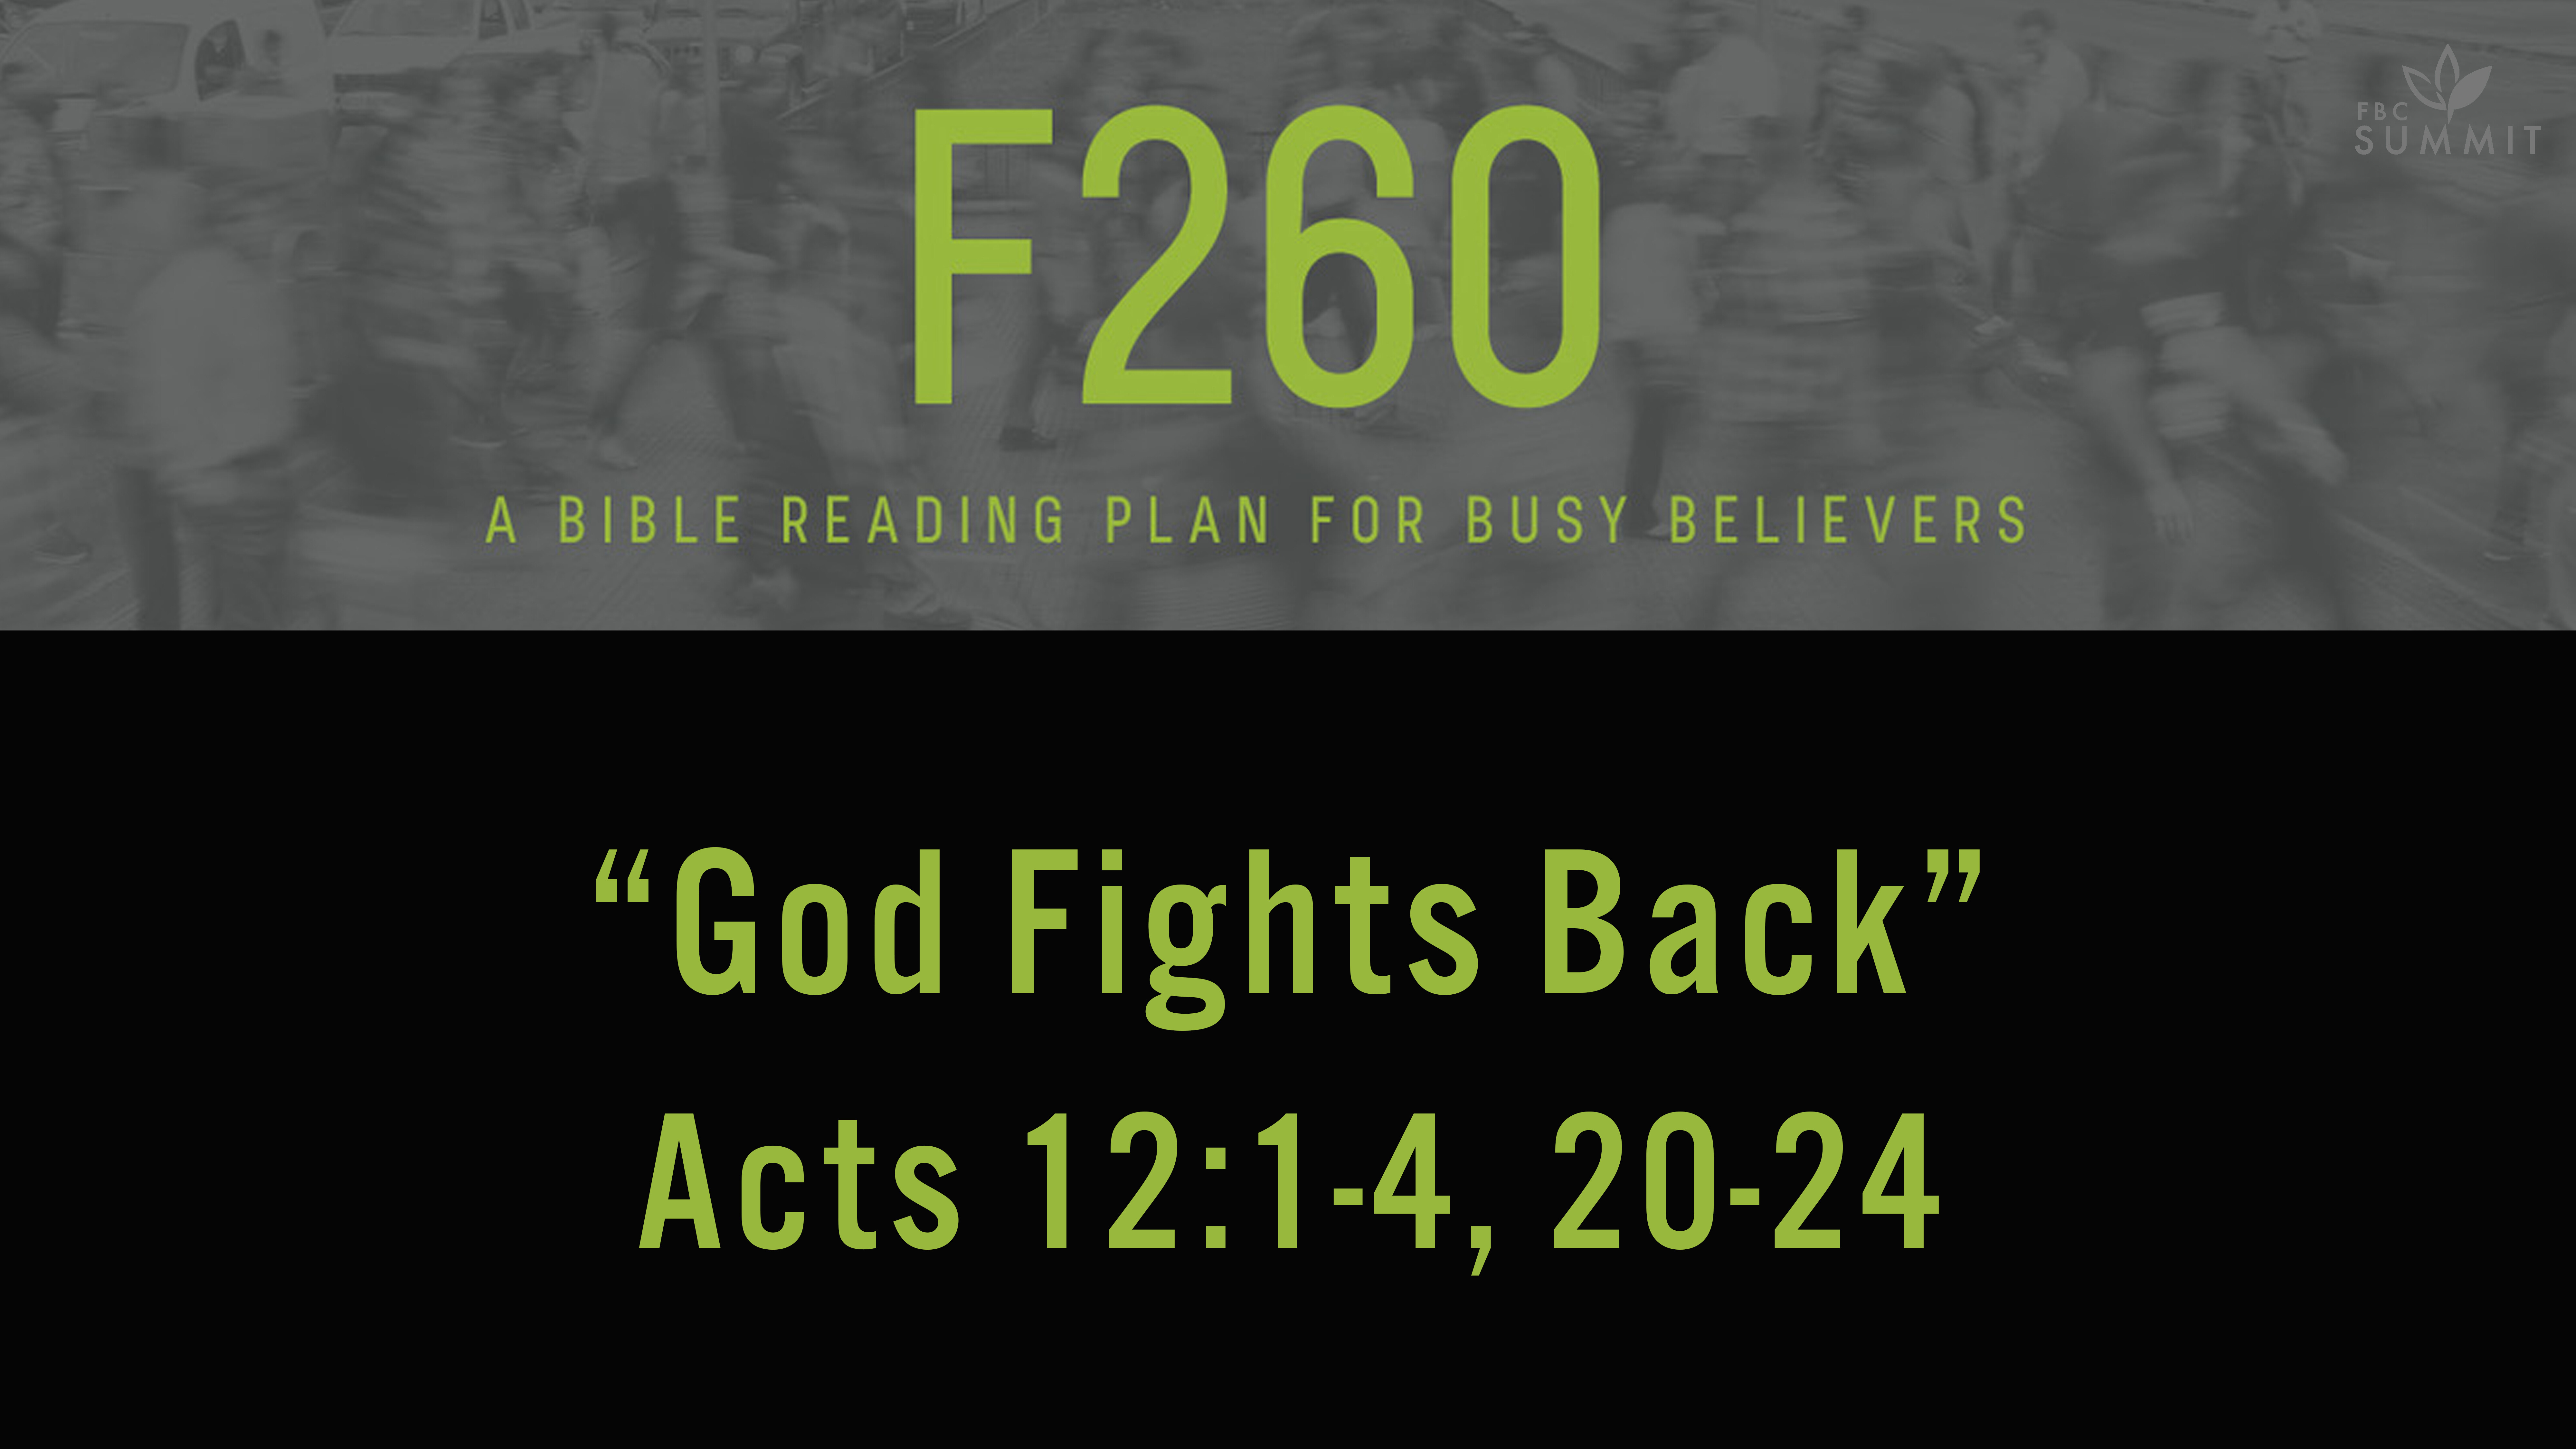 F260: "God Fights Back" Acts 12:1-4, 20-24